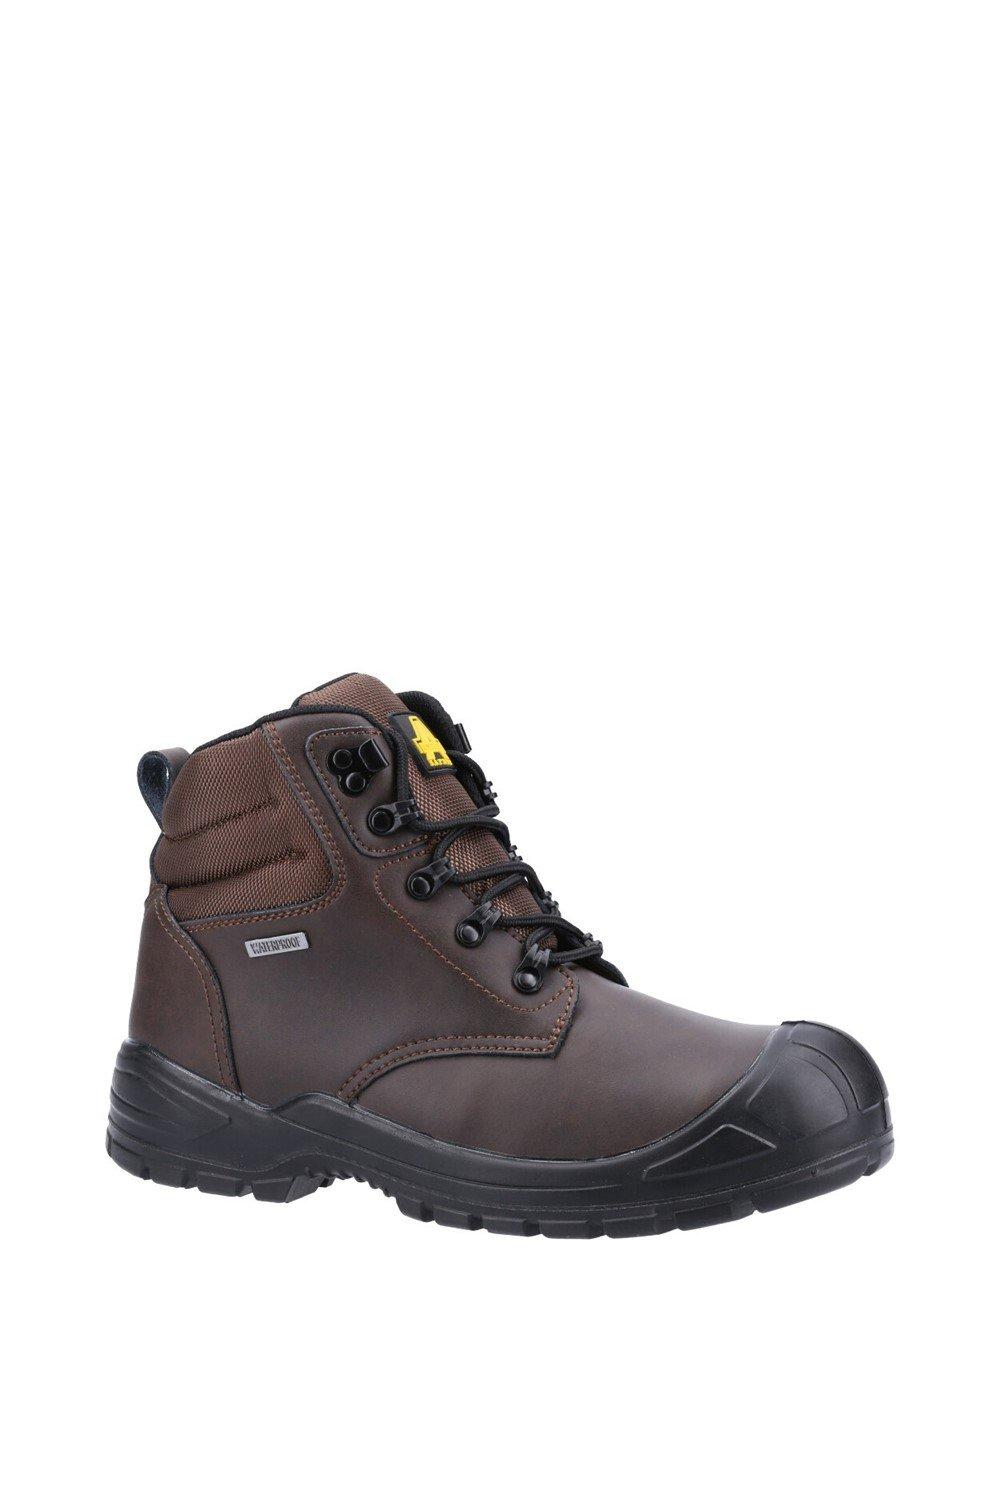 '241' Safety Boots